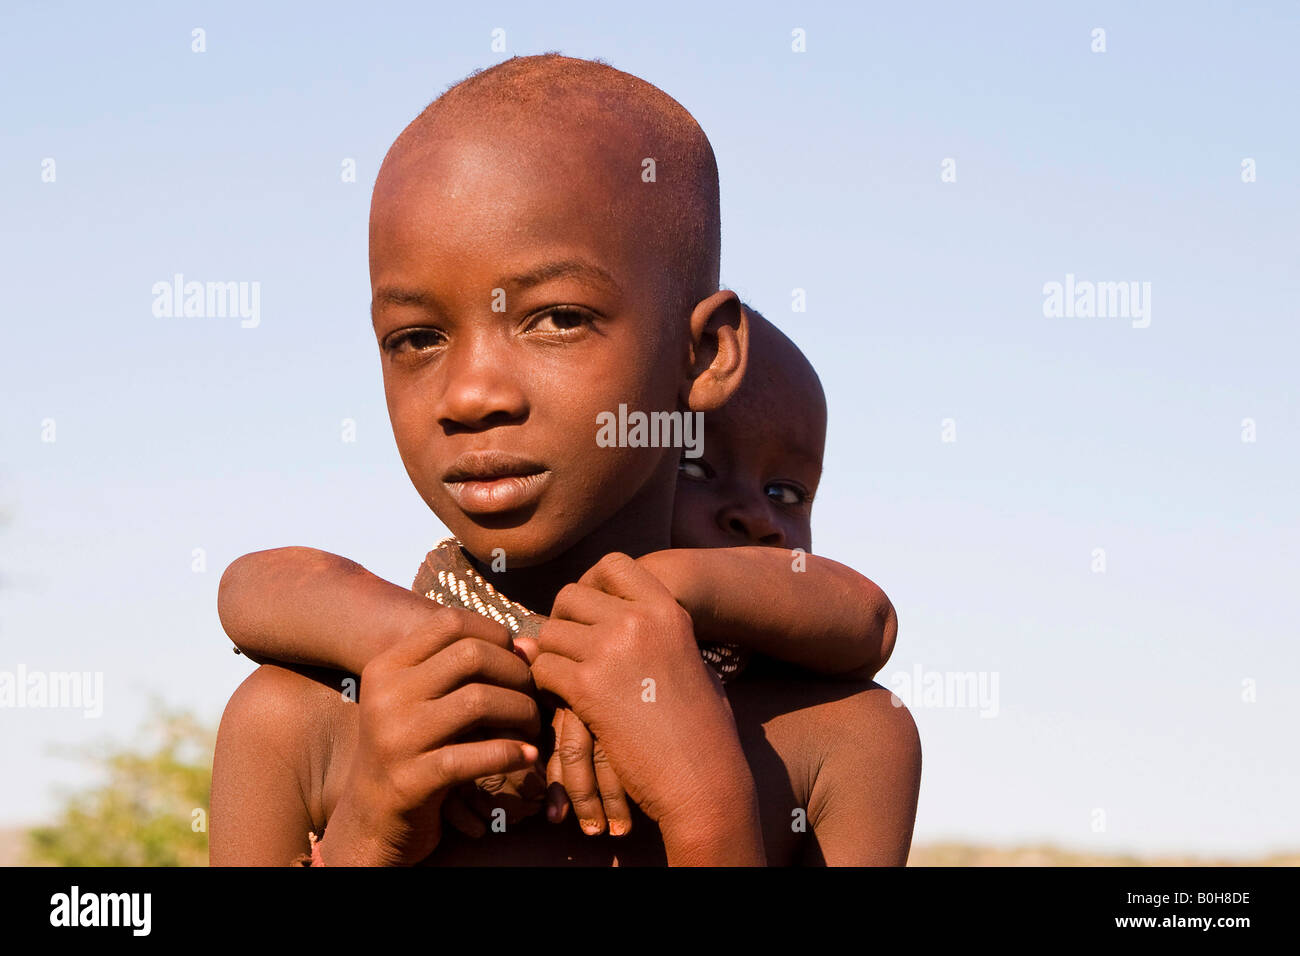 Himba boy carrying his little brother piggy-back, Namibia, Africa Stock Photo